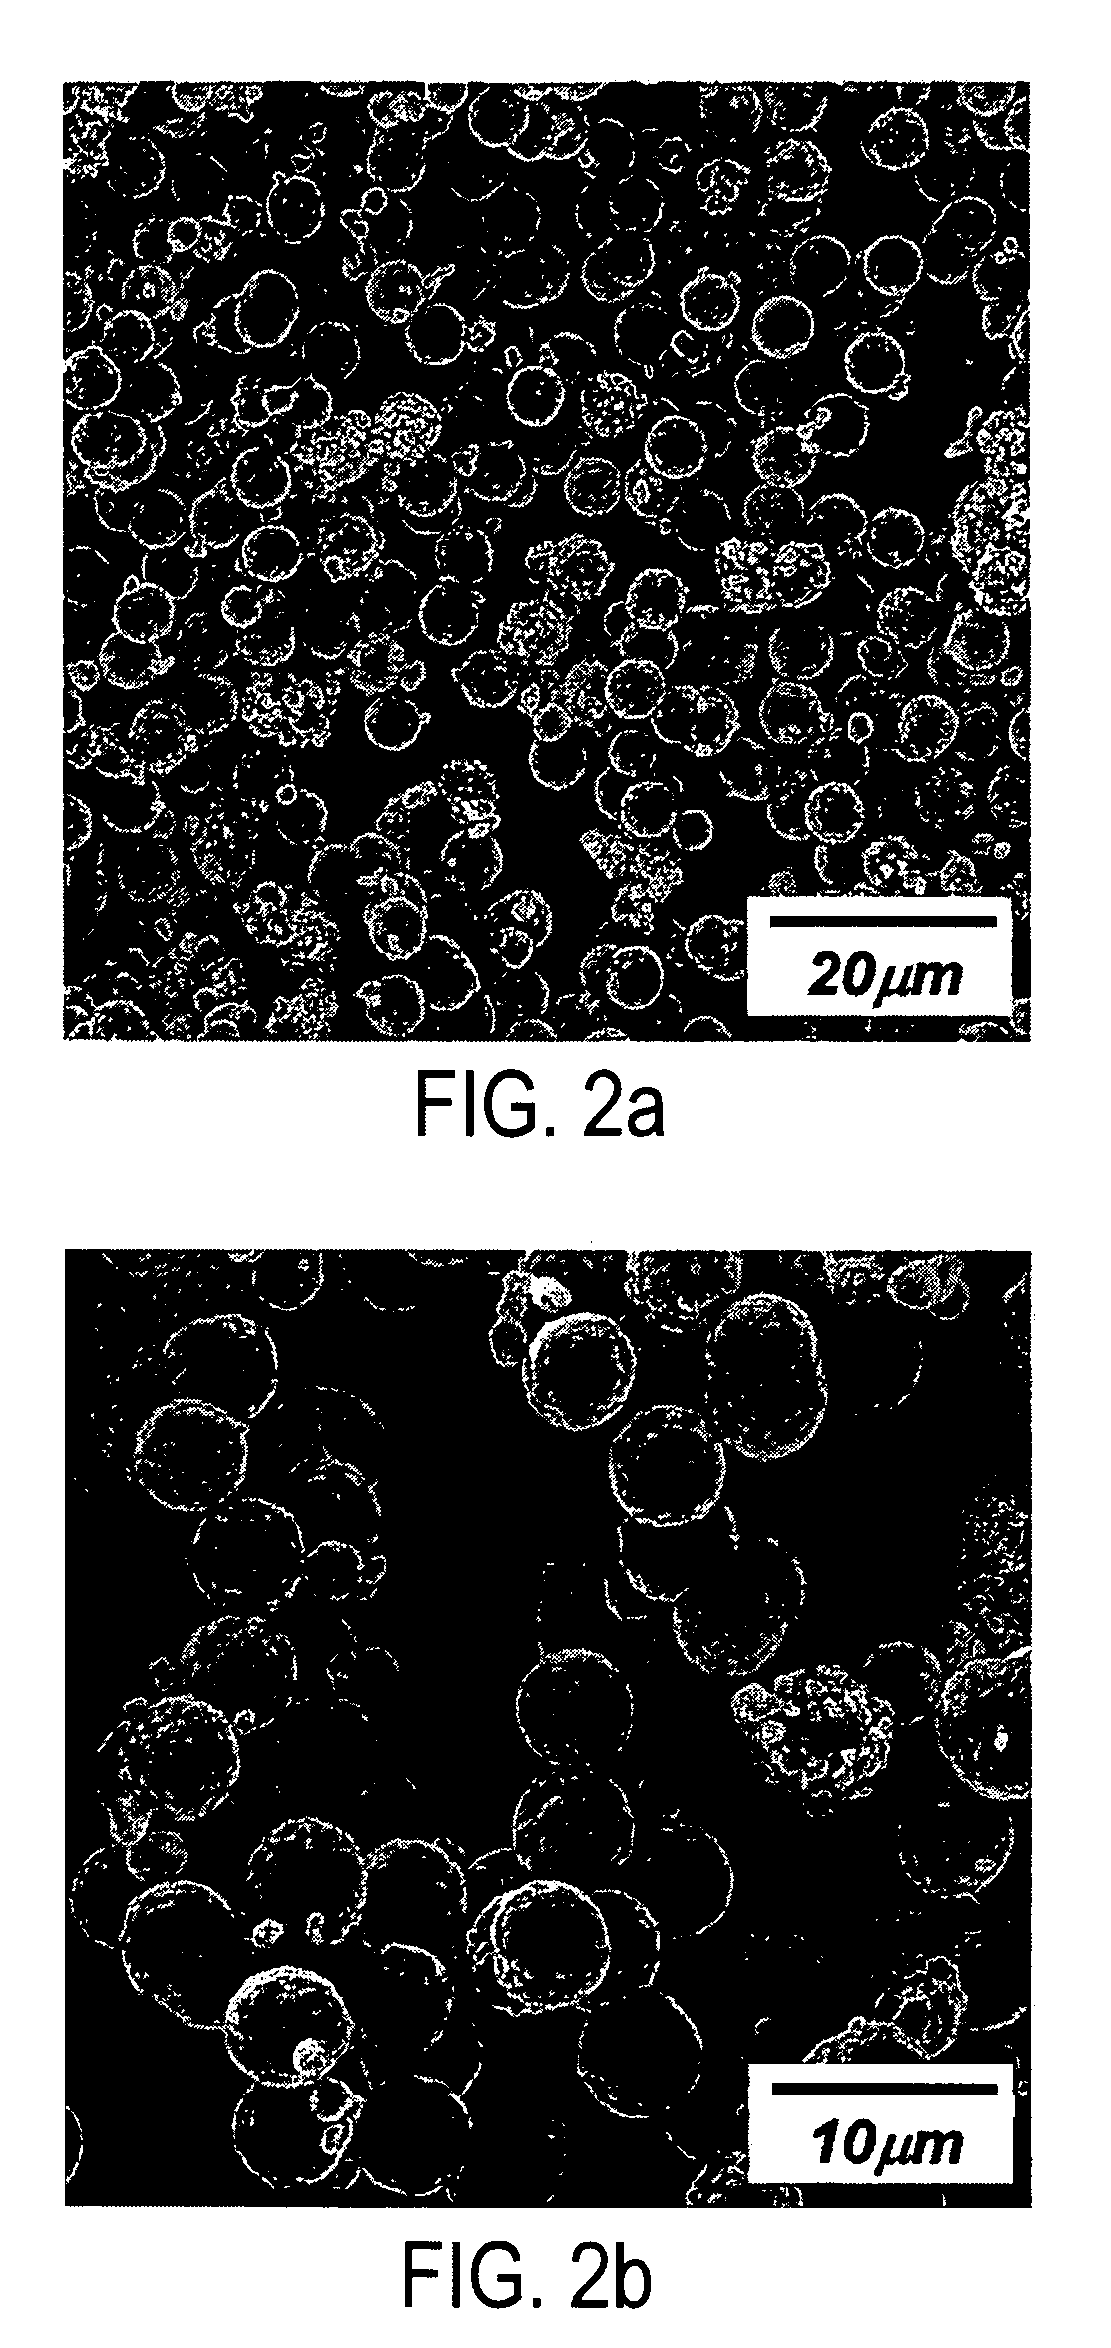 Method and apparatus for preparation of spherical metal carbonates and lithium metal oxides for lithium rechargeable batteries